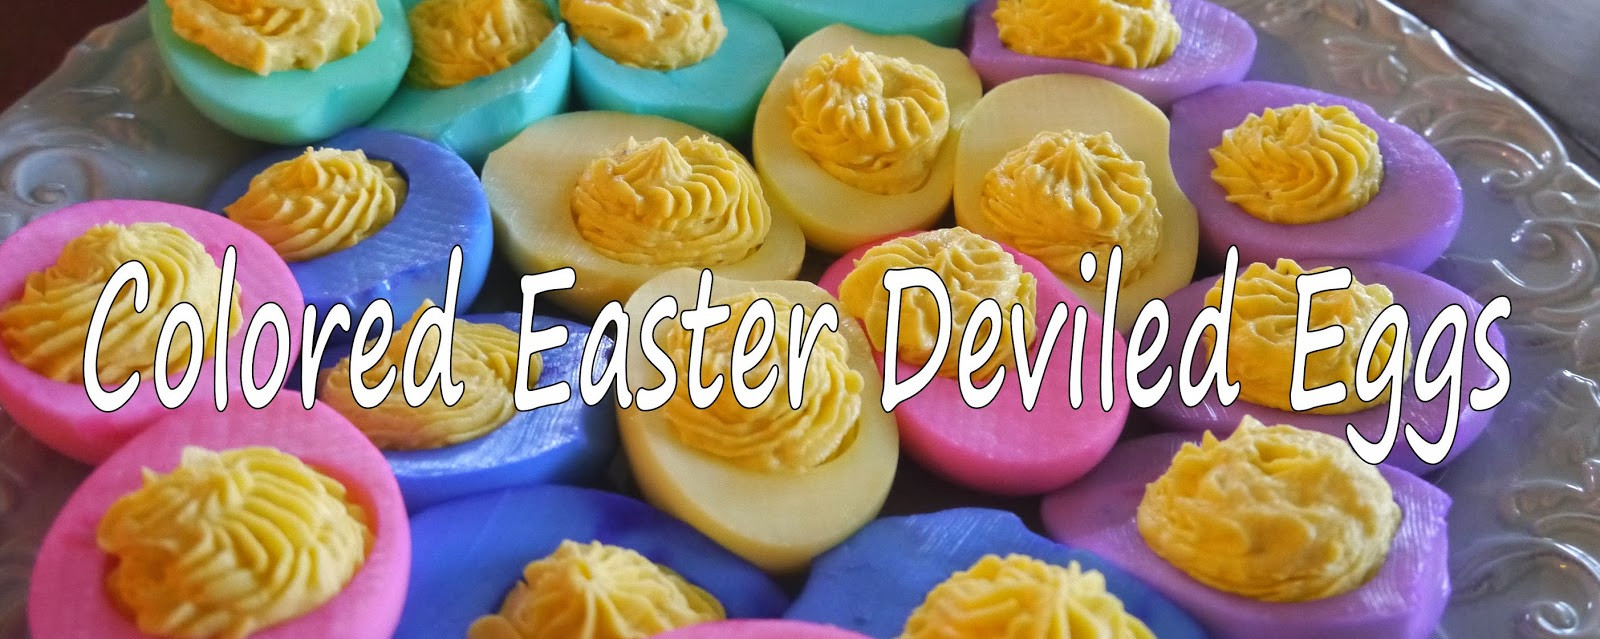 Easter Colored Deviled Eggs
 I Can Totally Do That Colored Easter Deviled Eggs